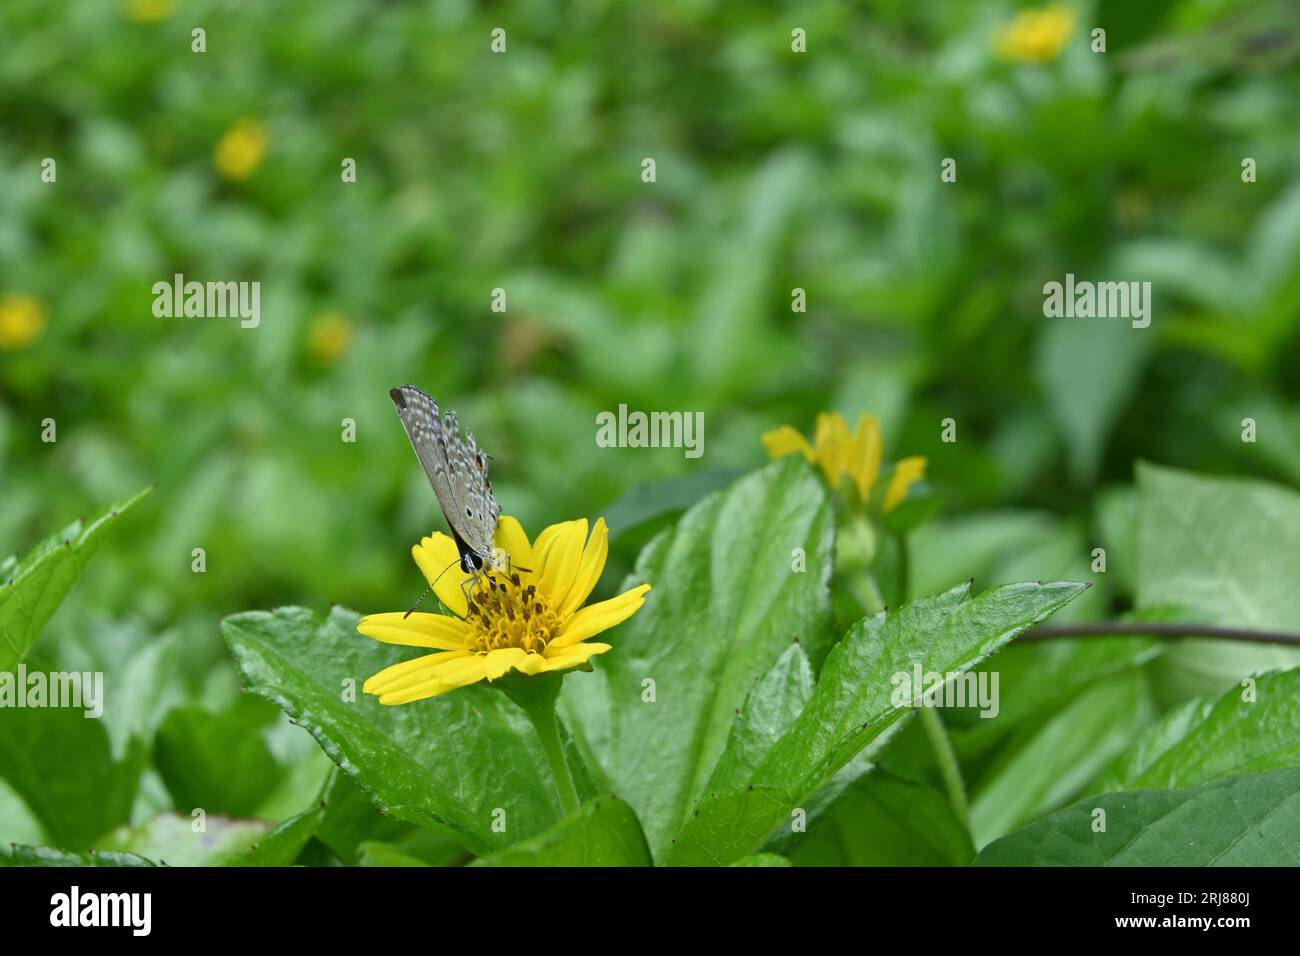 Front face view of a Plains Cupid butterfly drinking nectar from a Singapore Daisy flower (Sphagneticola Trilobata) Stock Photo